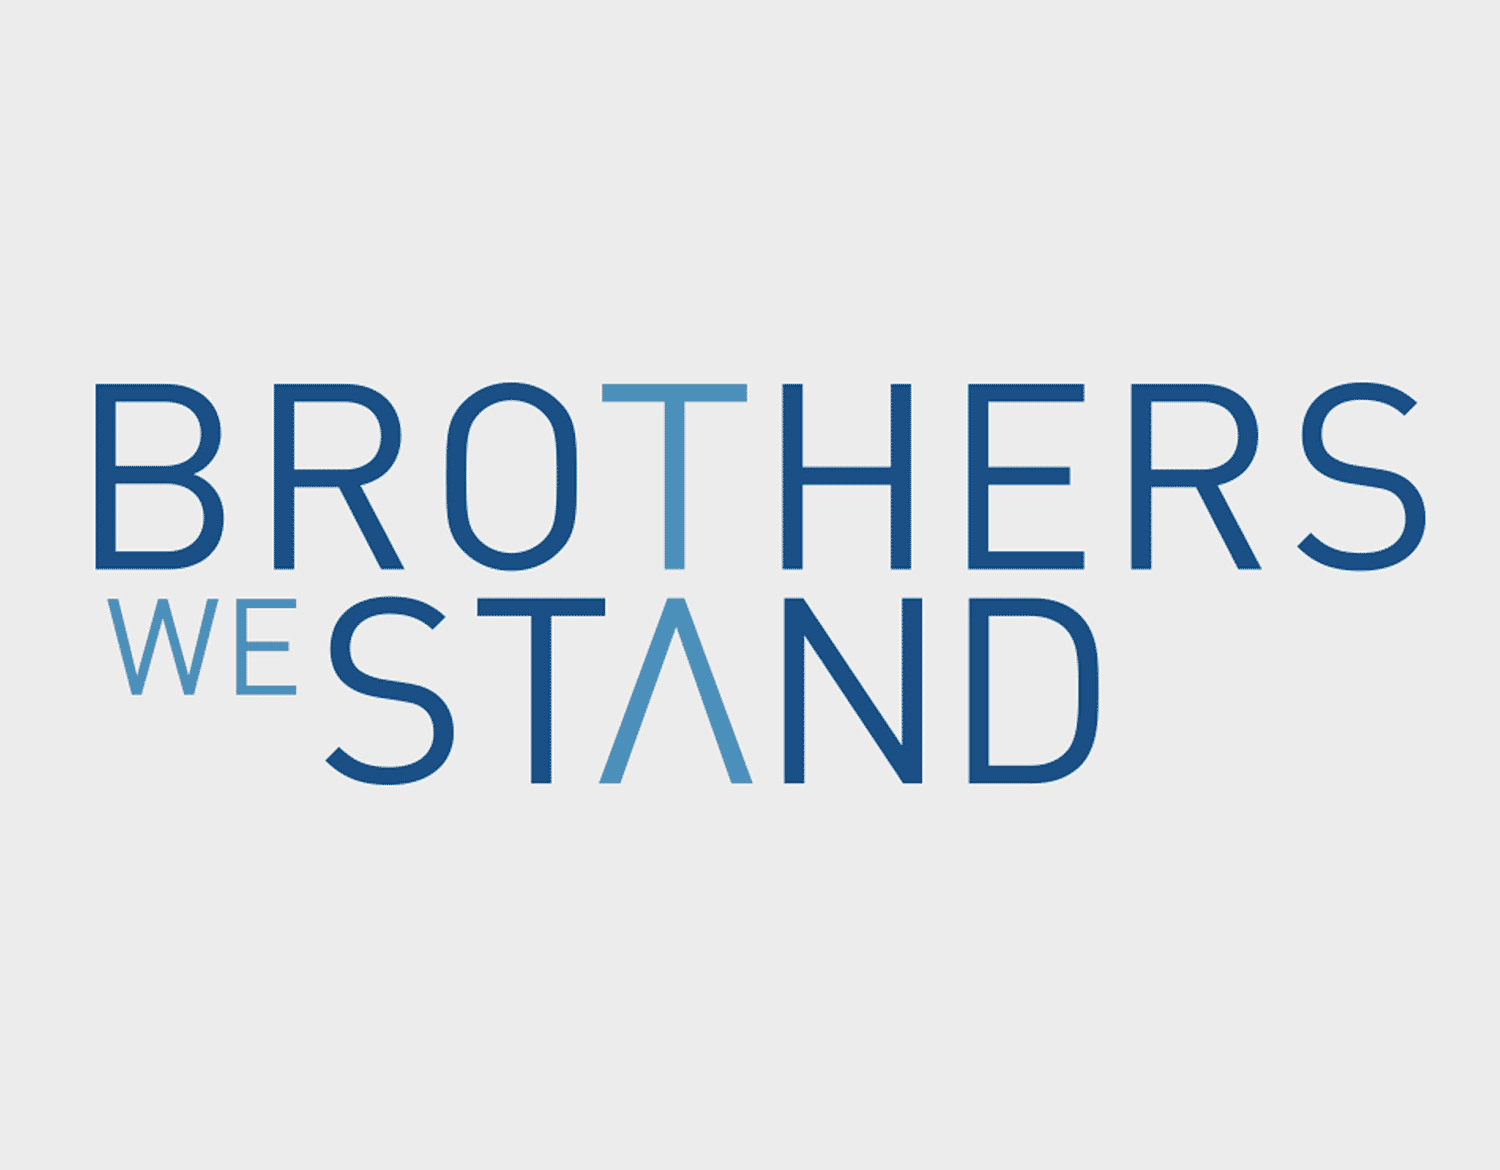 Brothers We Stand - Who made your shirt?